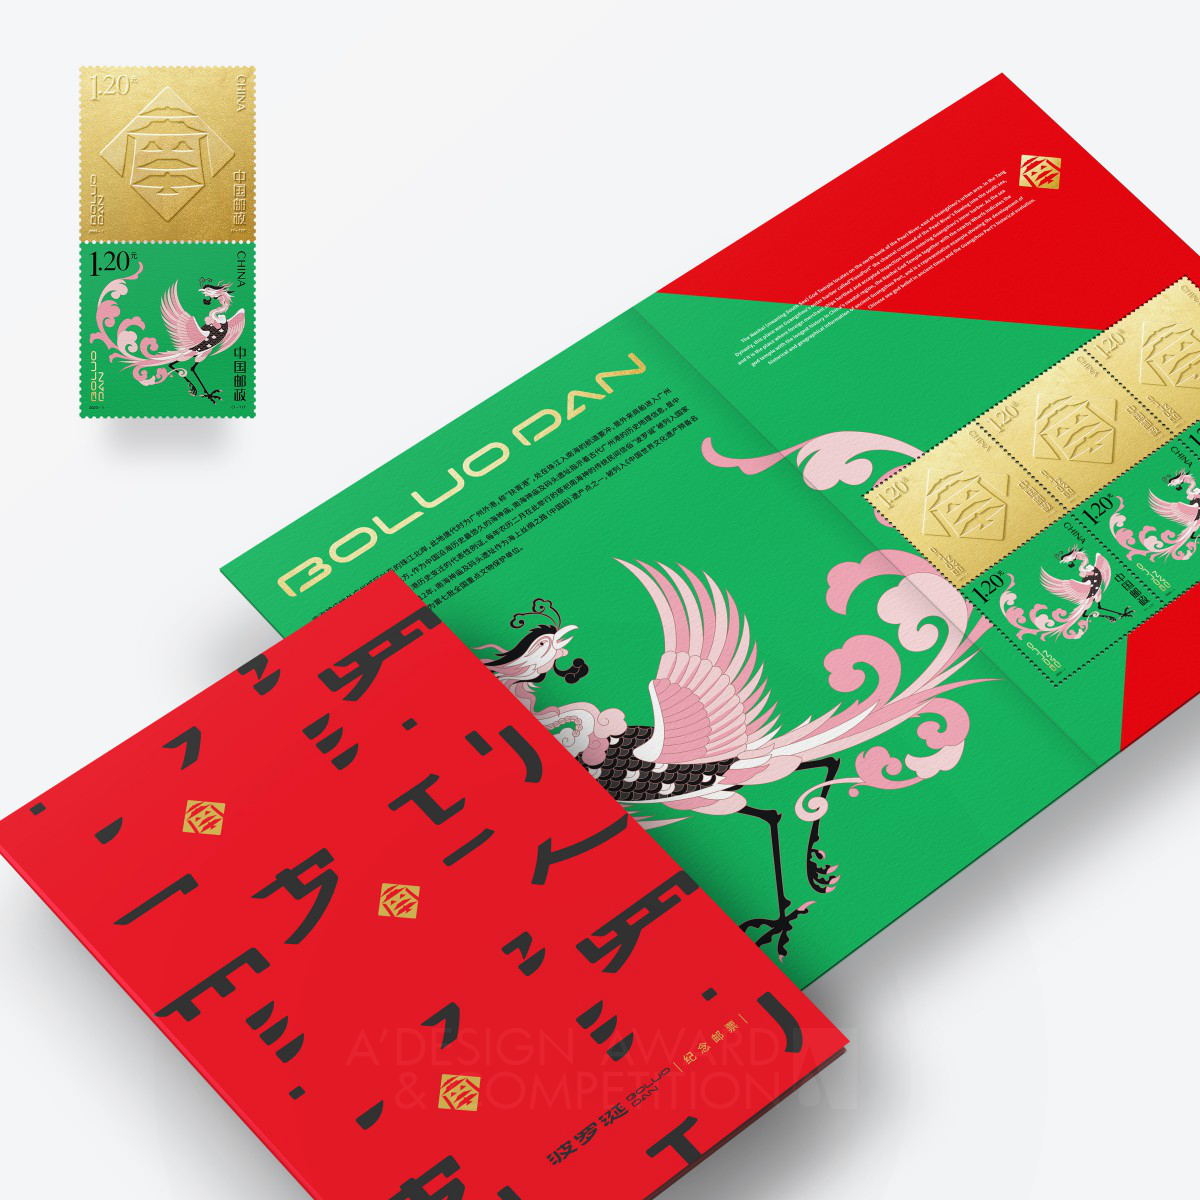 Boluo Dan Logo And Brand Design by Guangzhou Cheung Ying Design Co., Ltd. Silver Graphics, Illustration and Visual Communication Design Award Winner 2024 